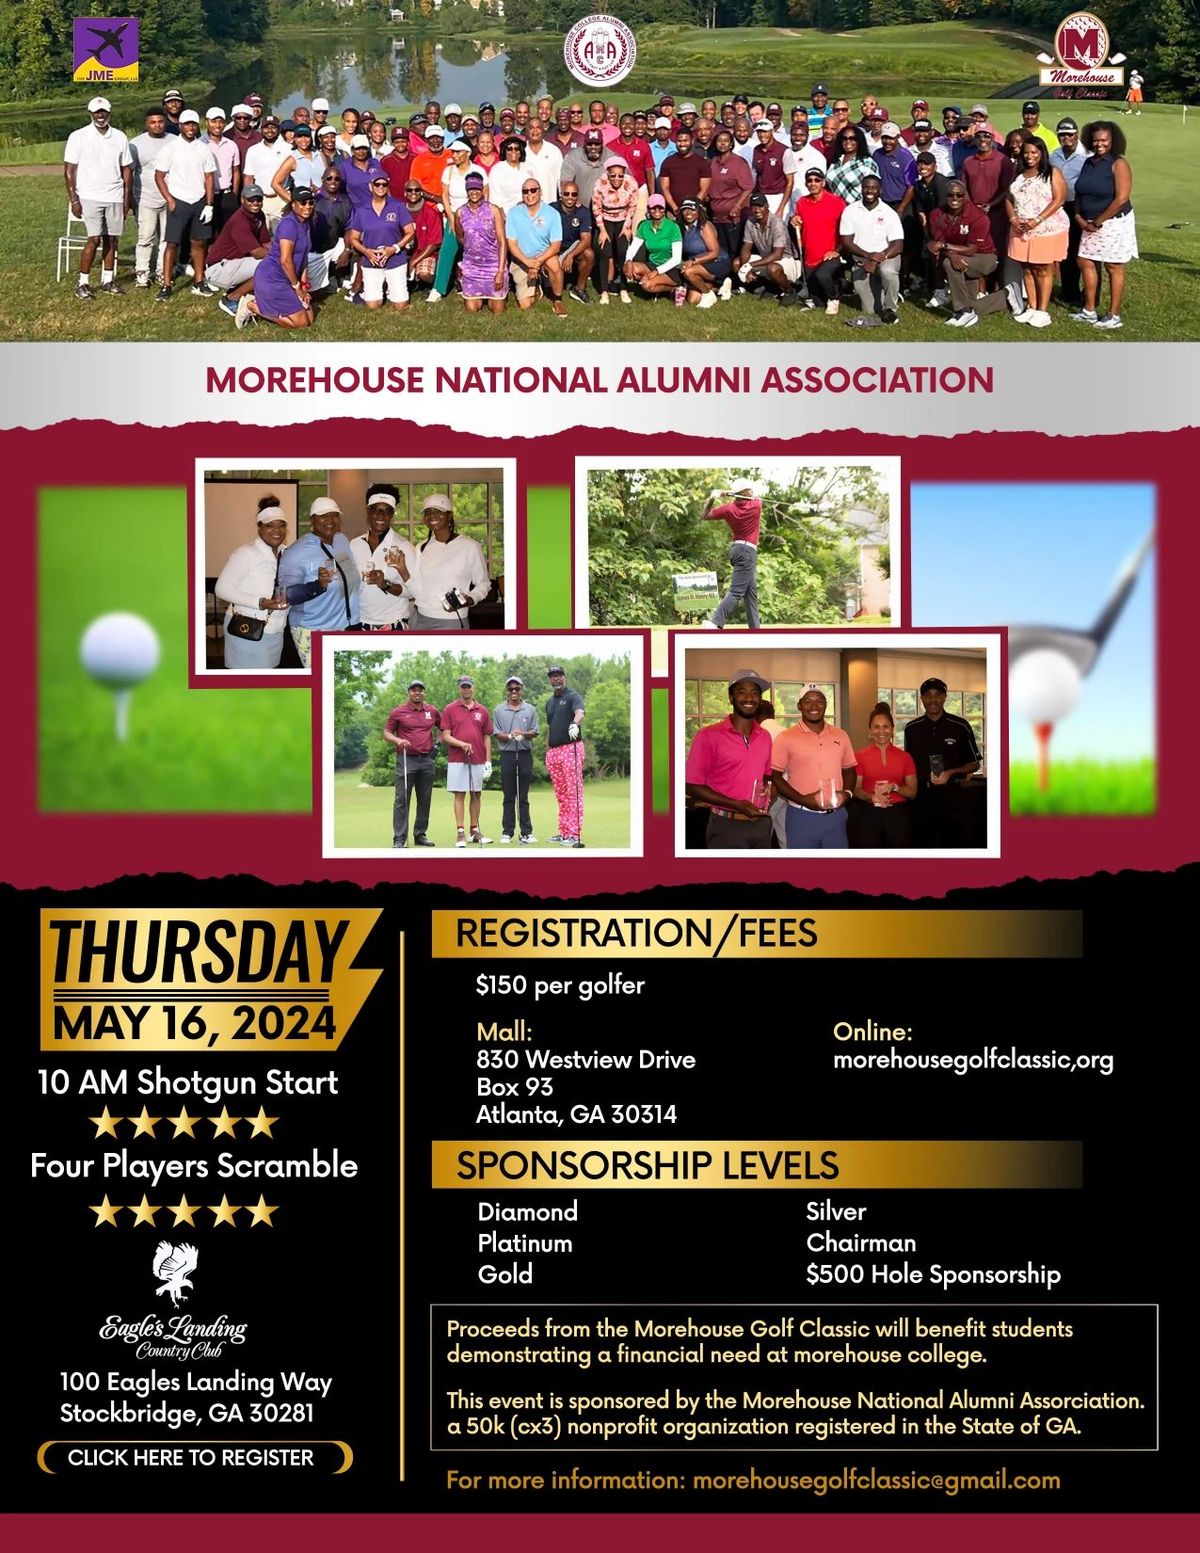 THE MOREHOUSE GOLF CLASSIC ATL 2024